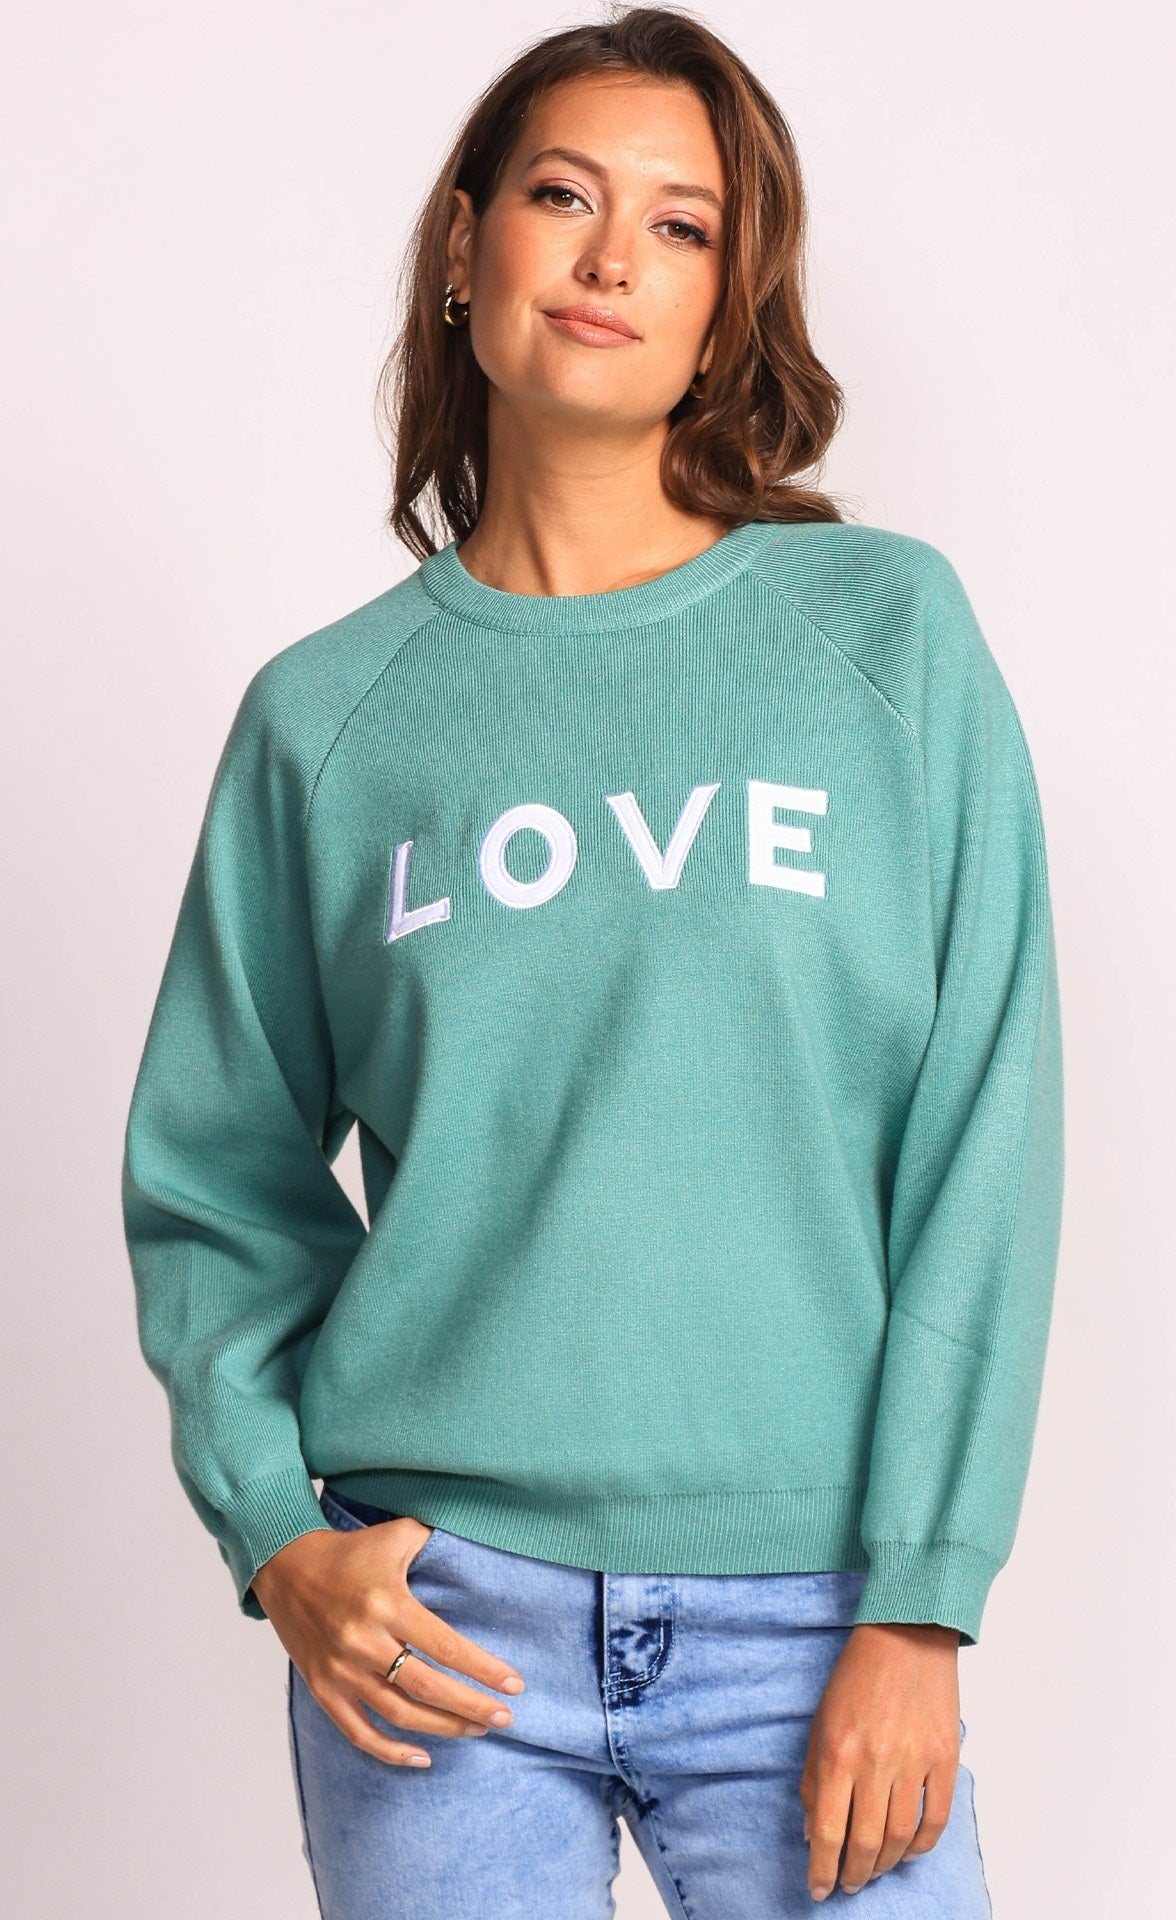 LOVE SWEATER-lilac or teal